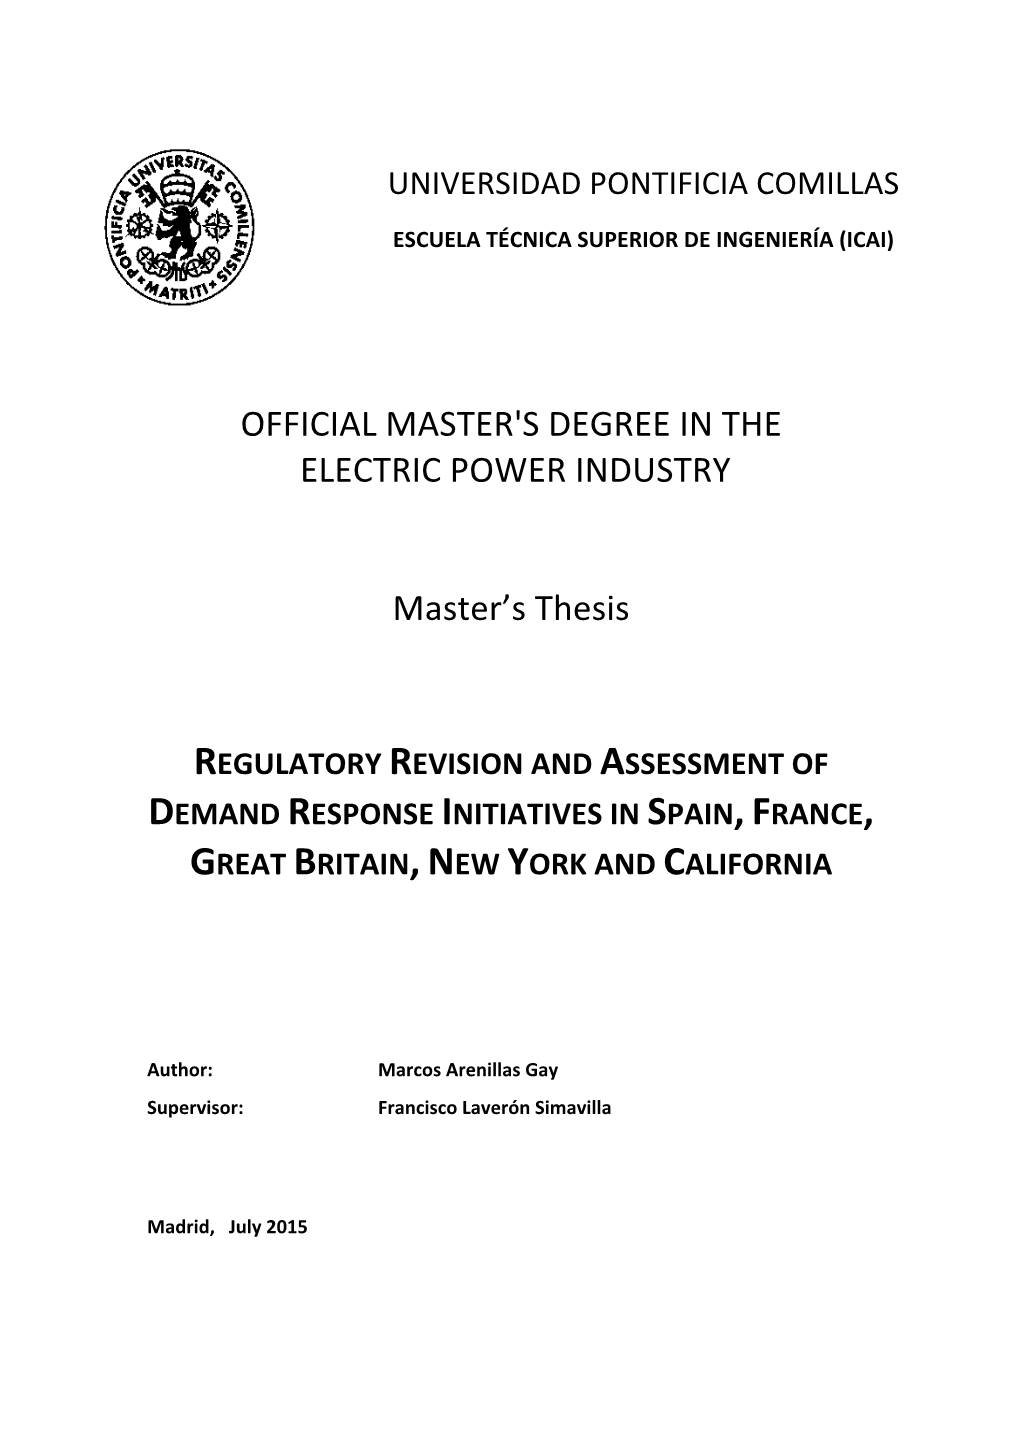 Official Master's Degree in the Electric Power Industry